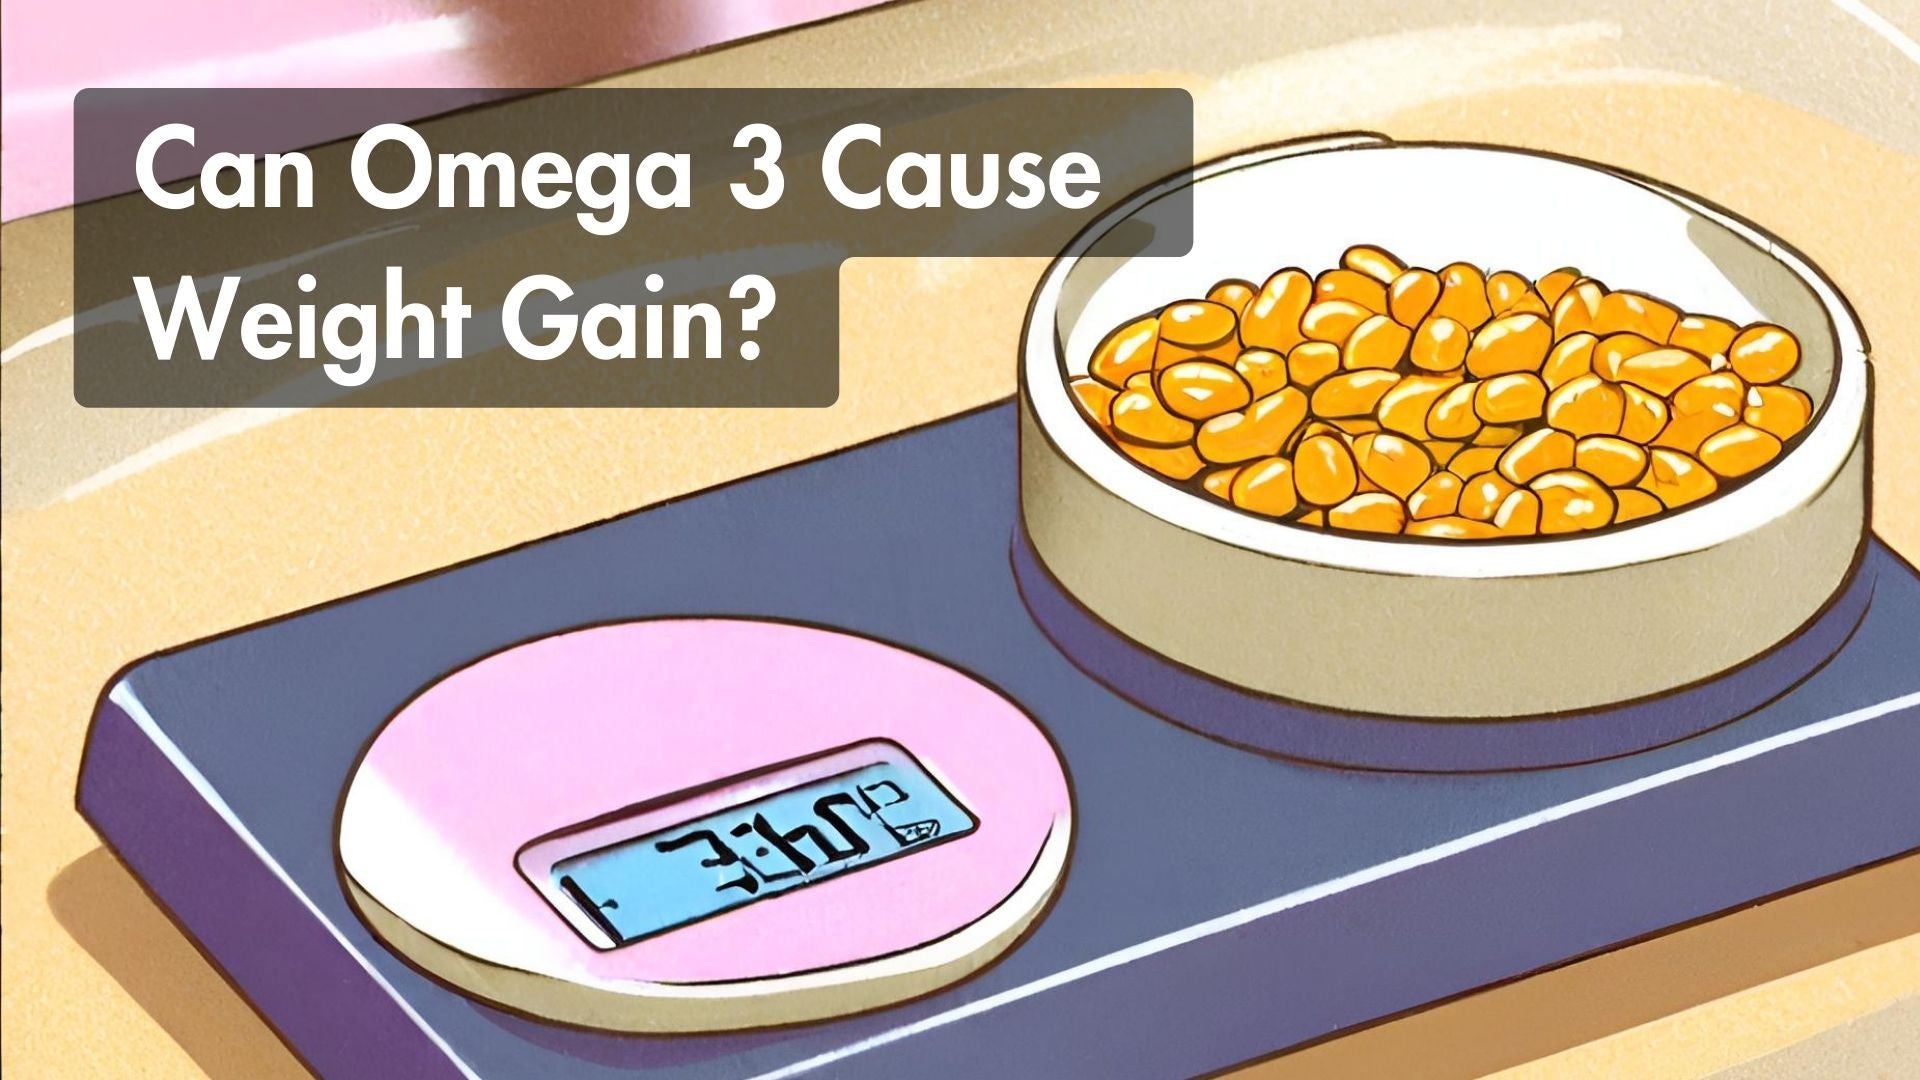 Can Omega 3 Cause Weight Gain